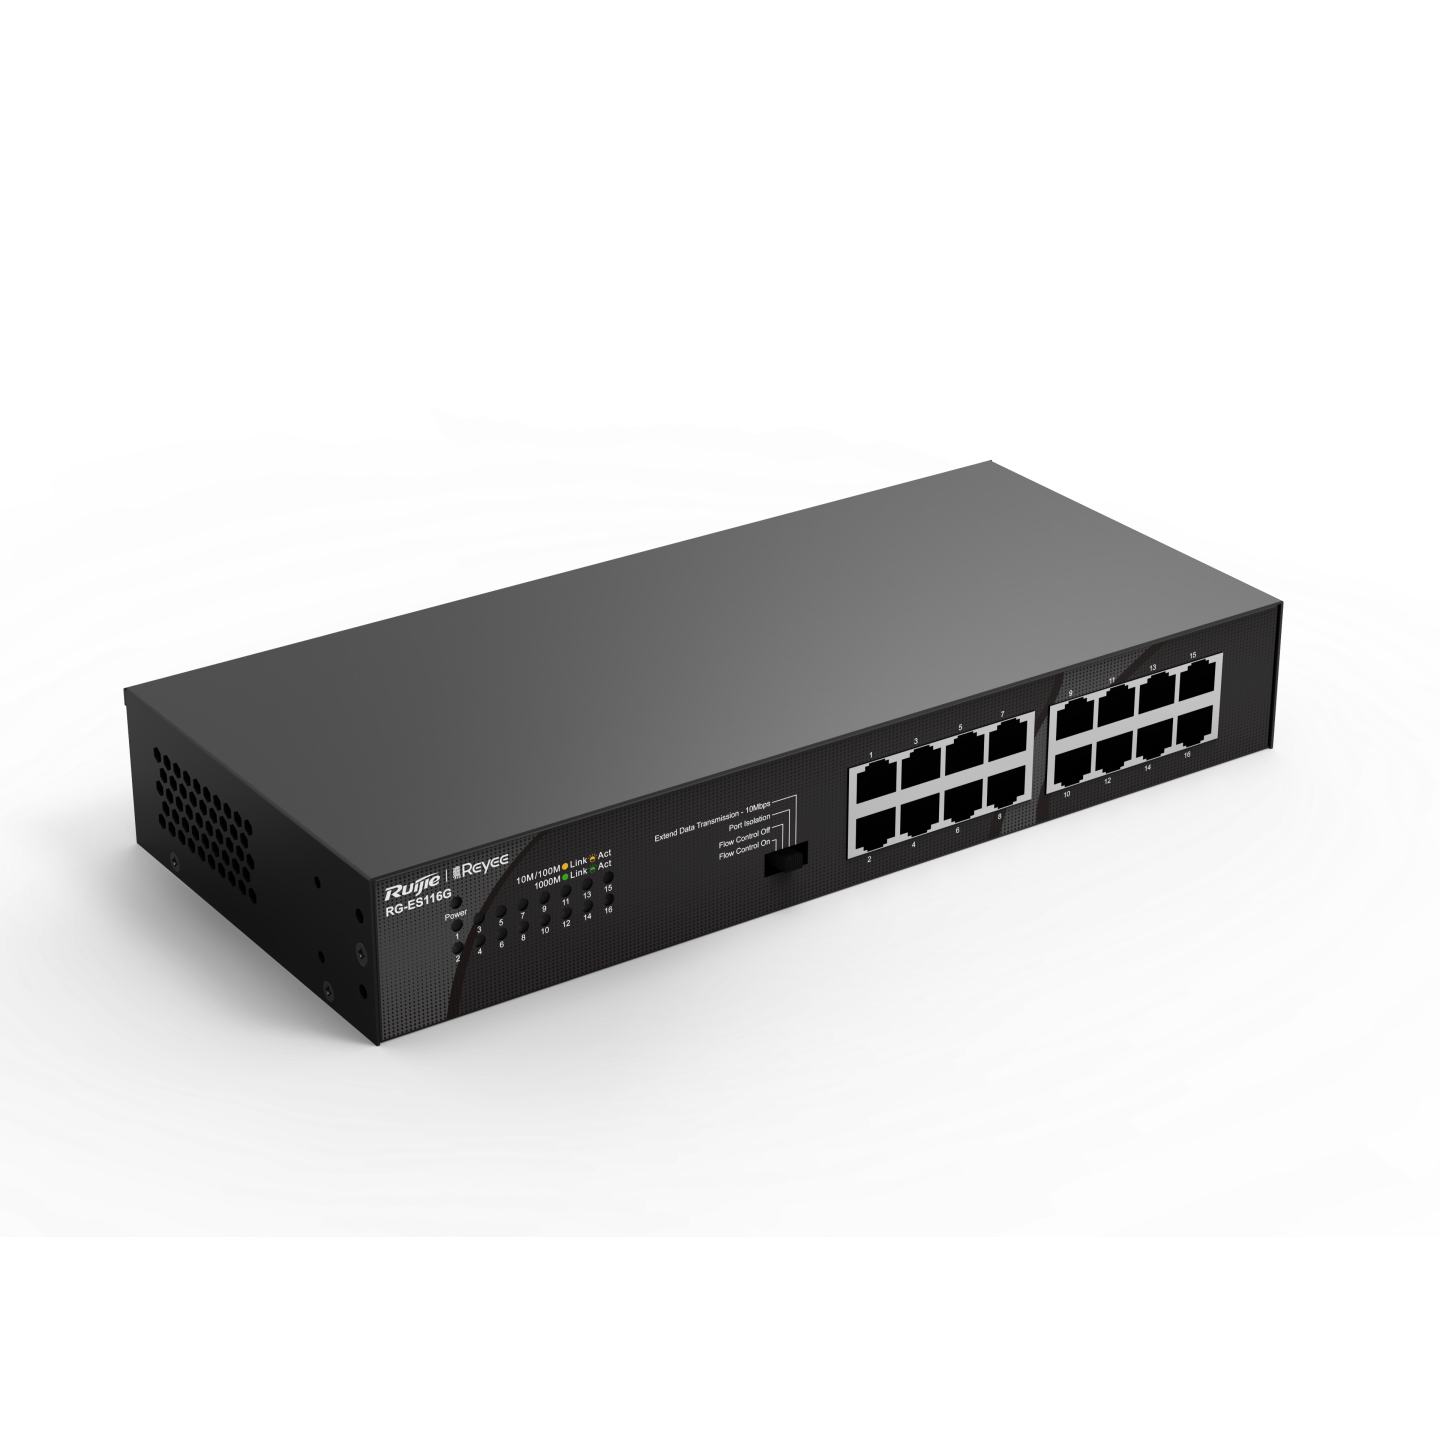 Ruijie RG-ES116G, 16-port 10/100/1000Mbps Unmanaged Non-PoE Switch